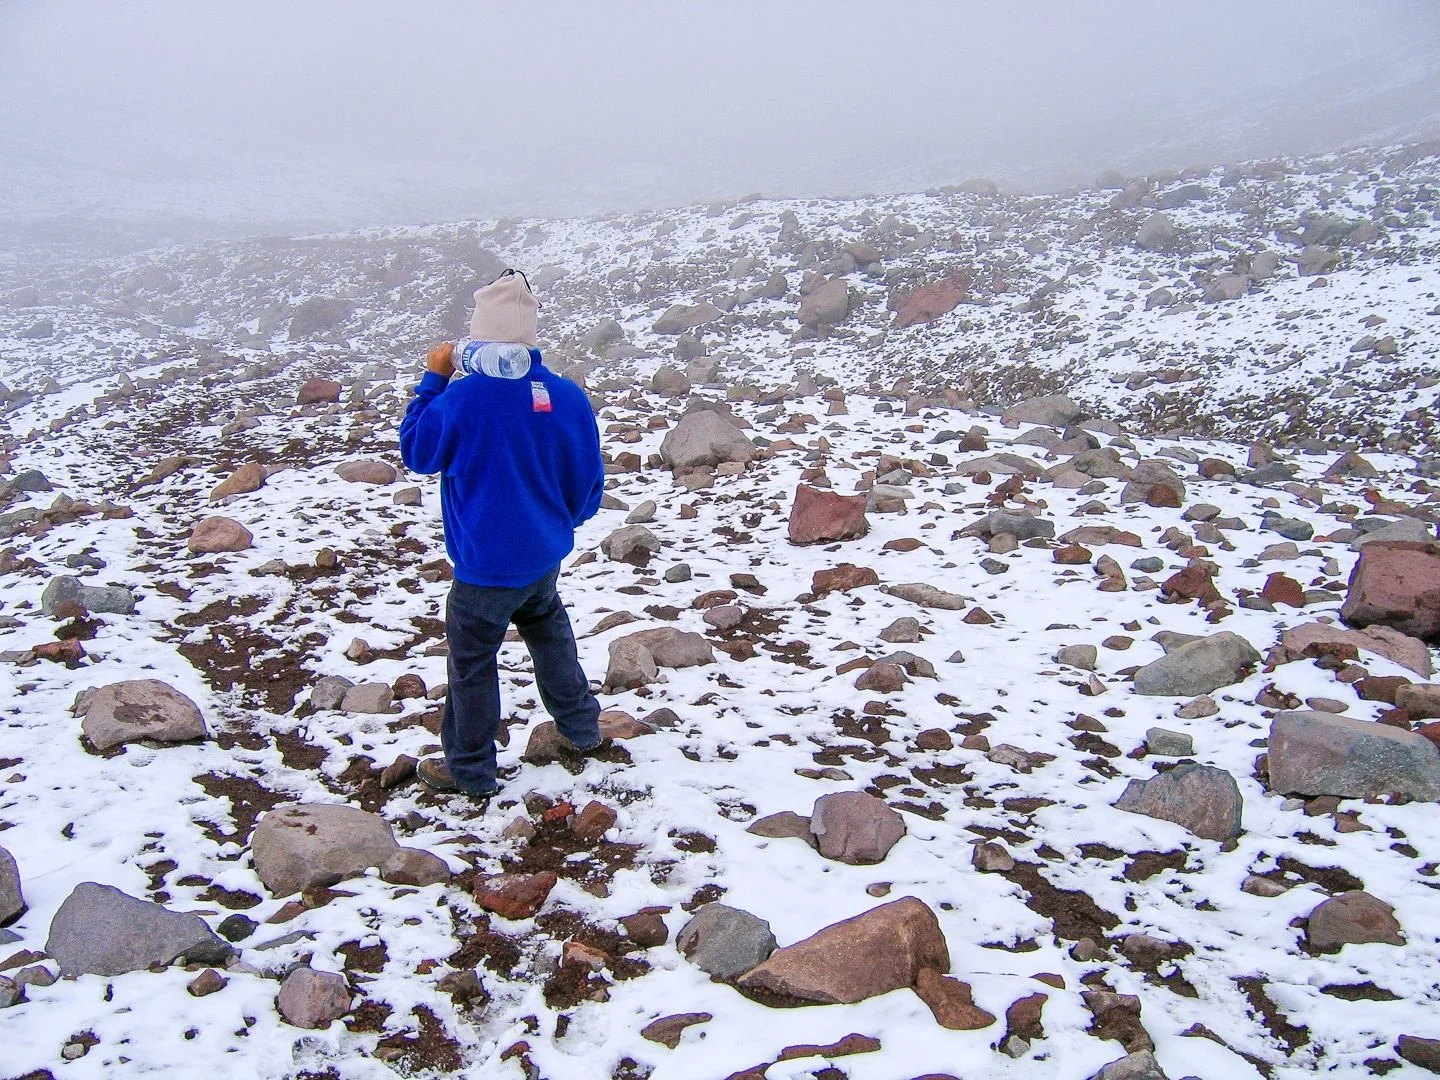 The last thing Ernie remembers before nearly blacking out over 5000m on Chimborazo in Ecuador was his guide Joel trotting along the mounting like they were at sea level.